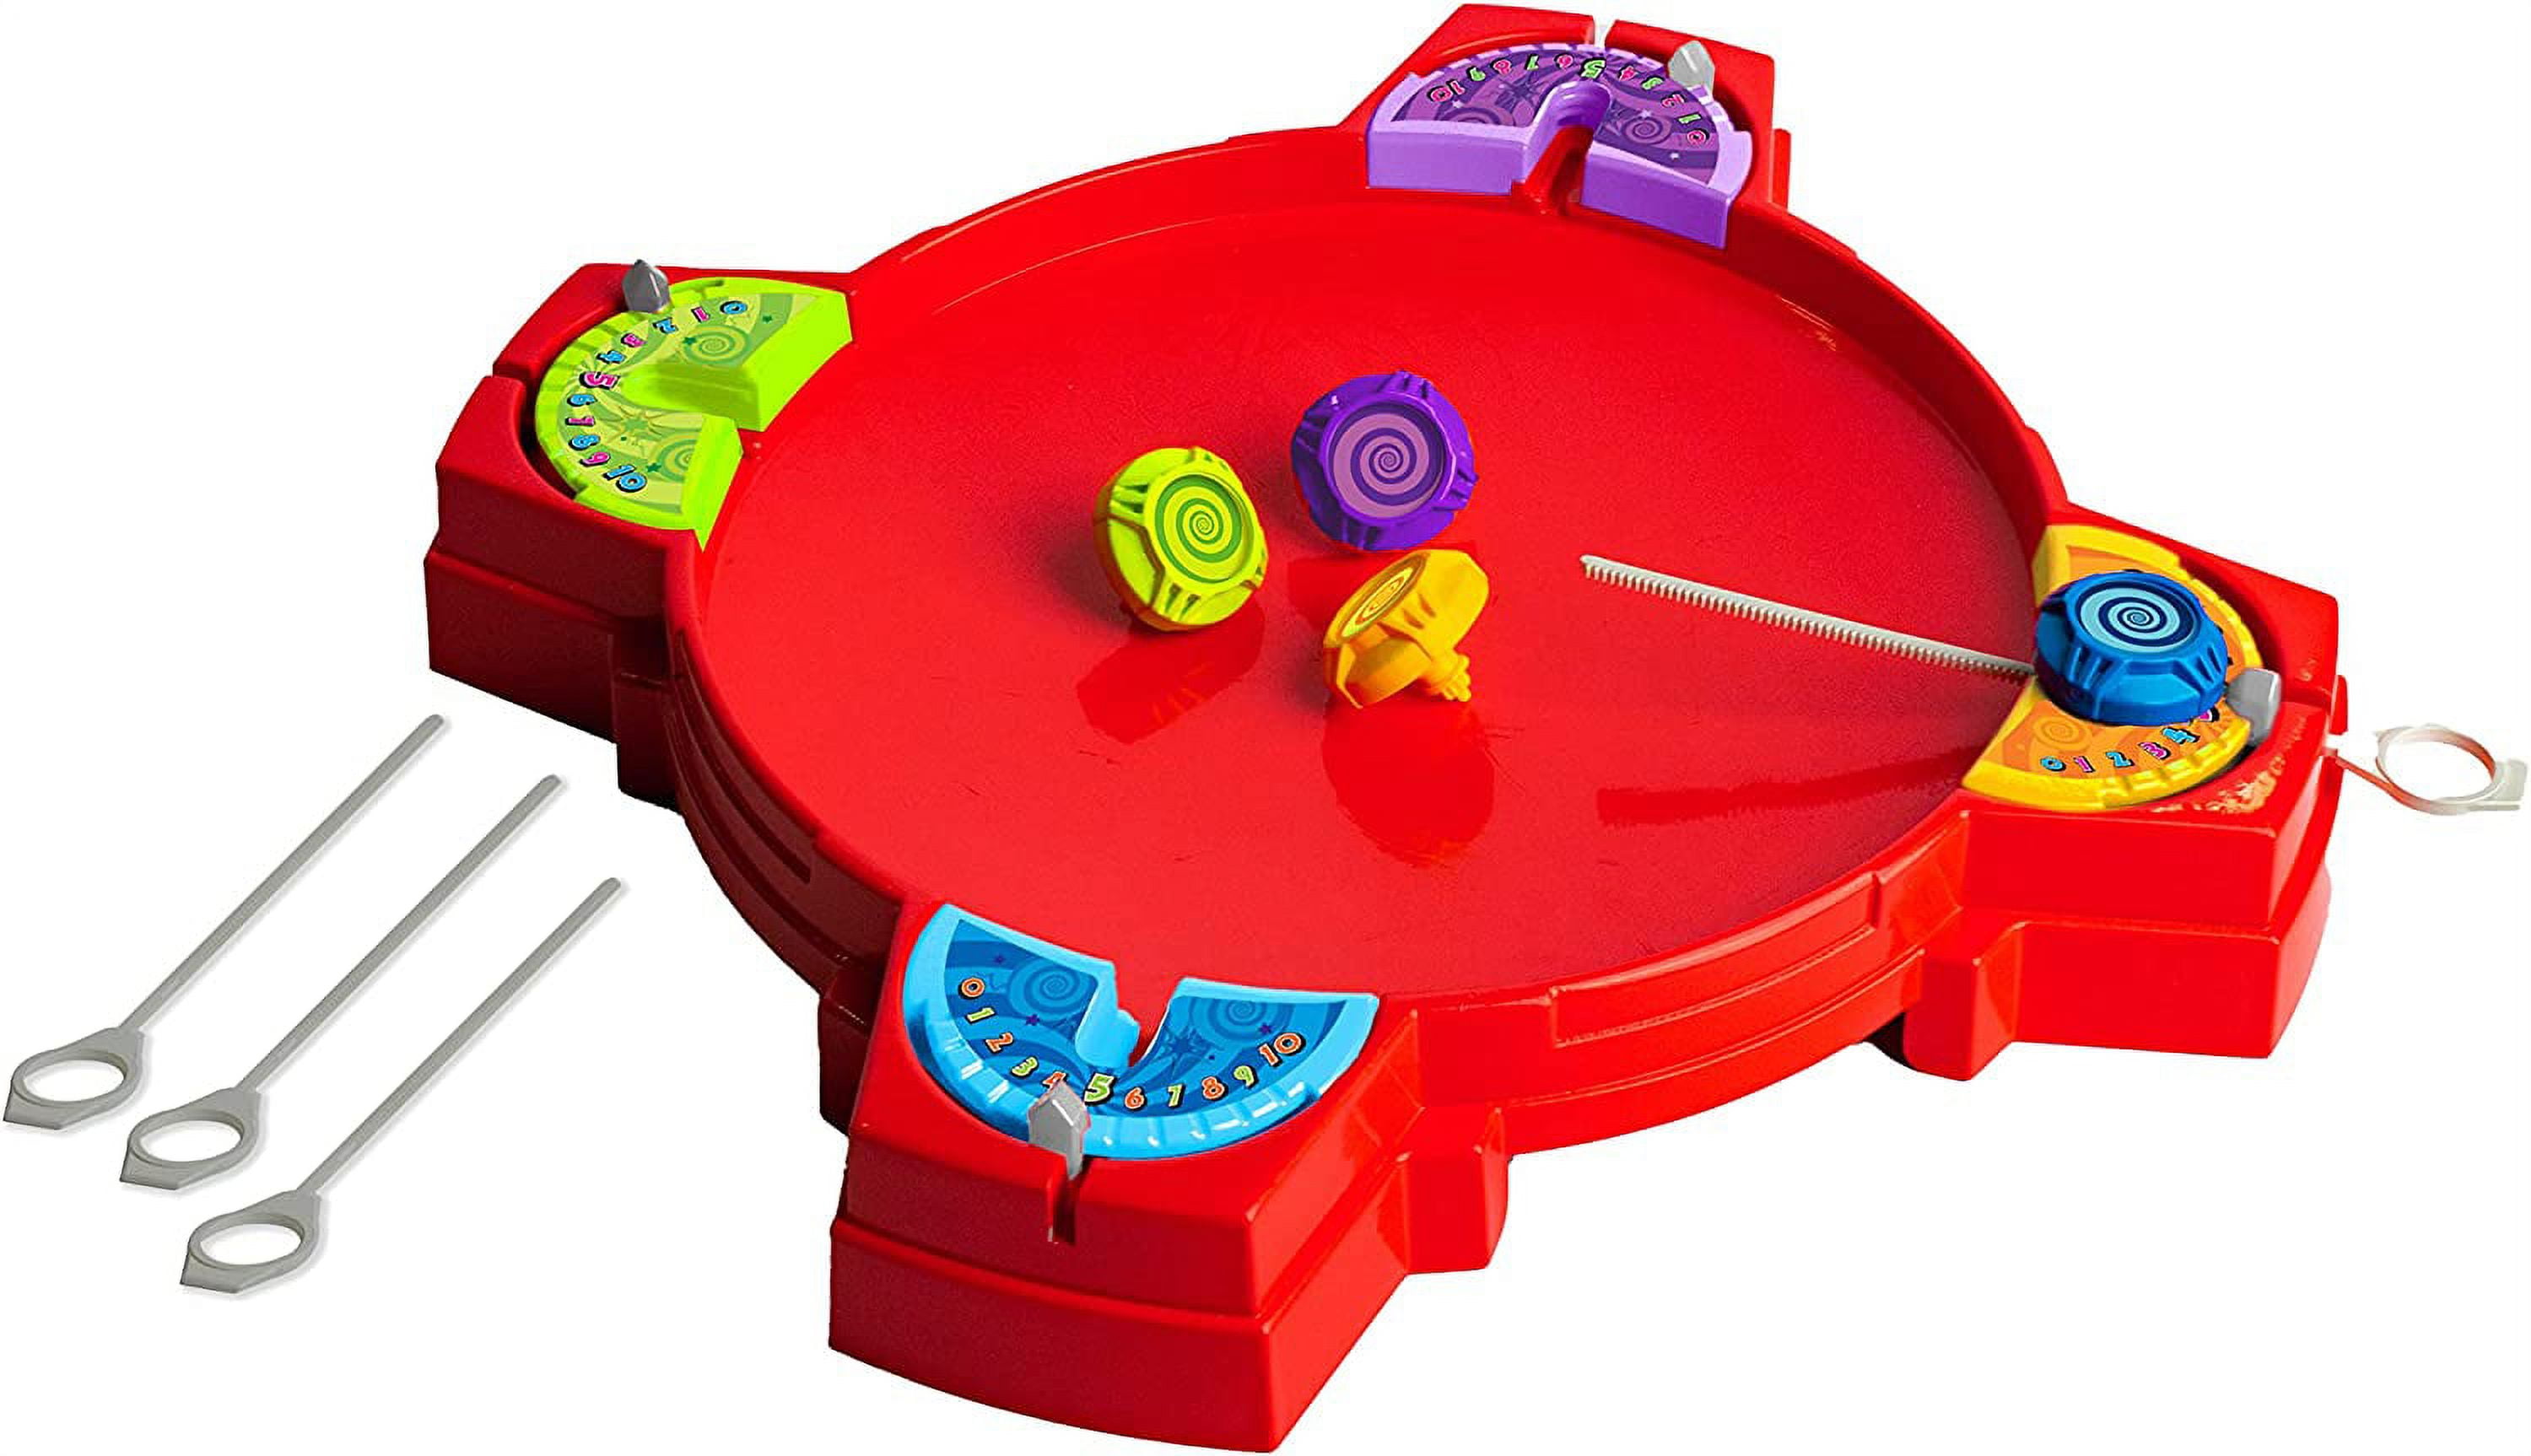 Pull! Set Insert, for Gyros Battling Ages Original 6+ Boys - Drop Battle The Other. To Stadium & Tops In Press 2 Each Game Spinning Tops 4 The Combat with Classic - & Kids. Girls